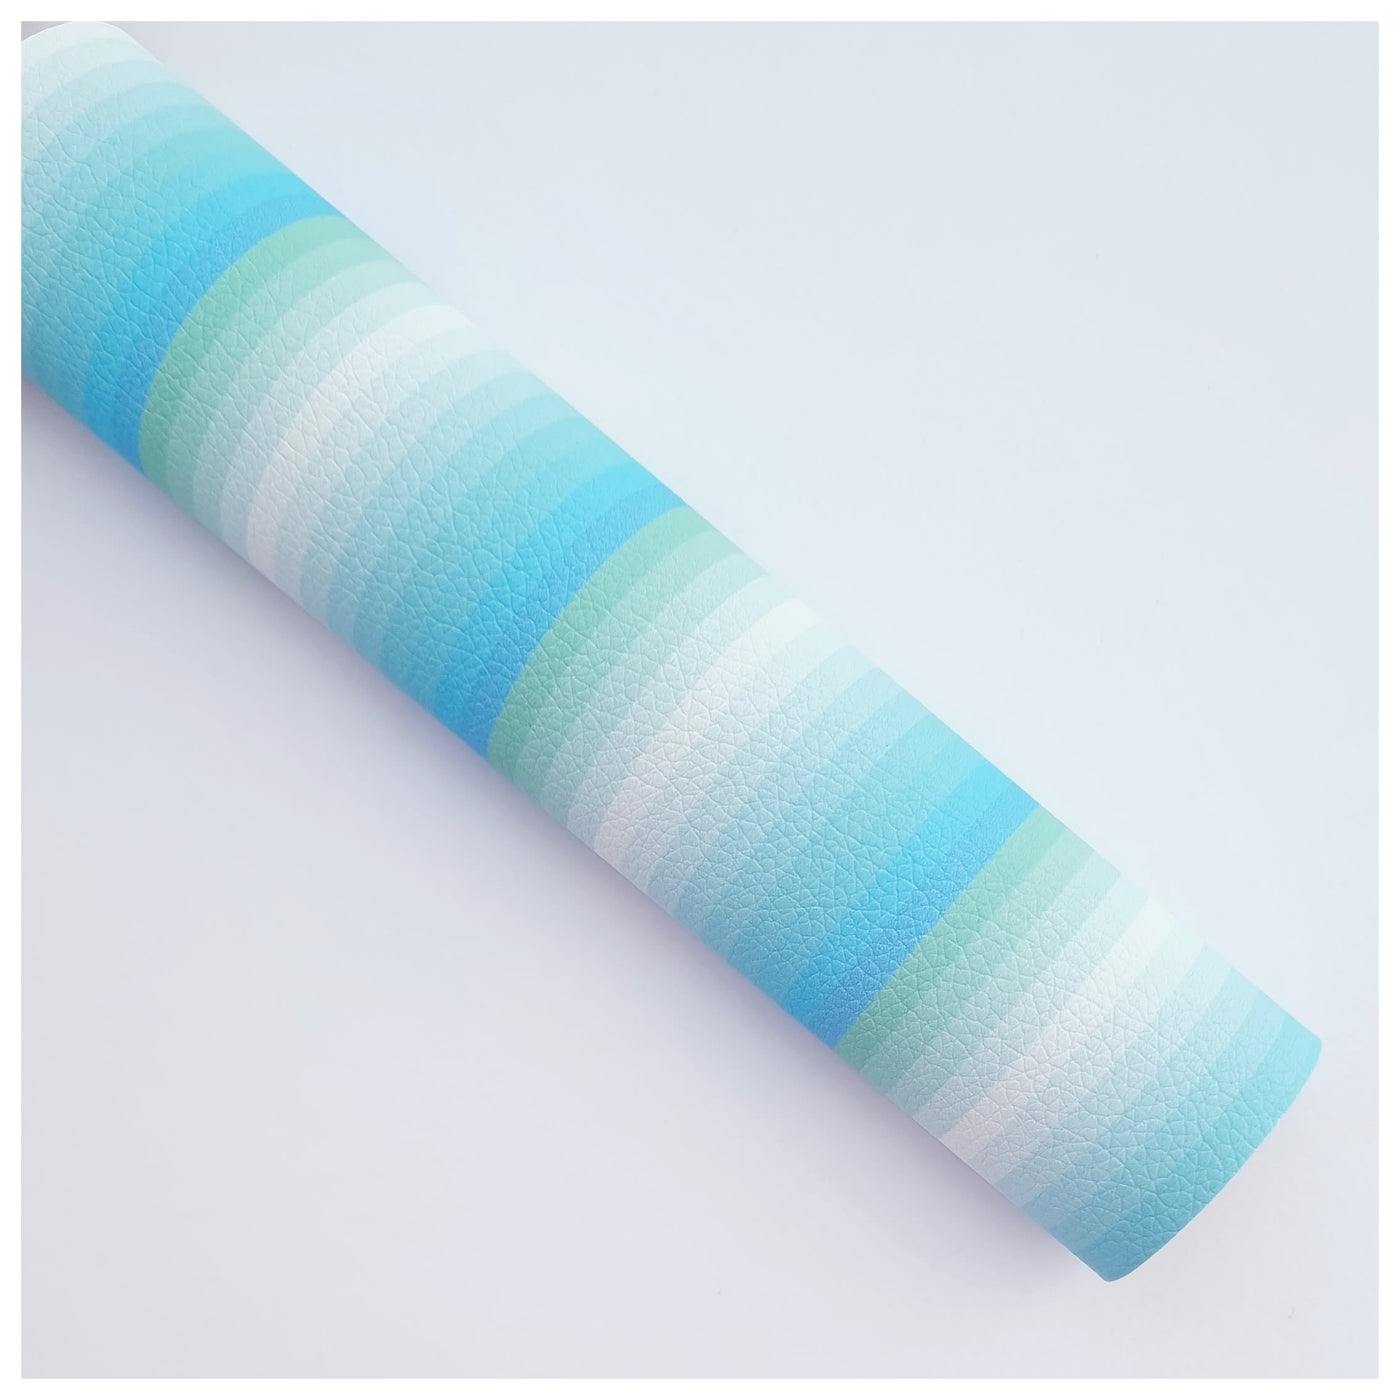 A4 Sheet of Mermaid Ombrè Stripes Litchi Leather